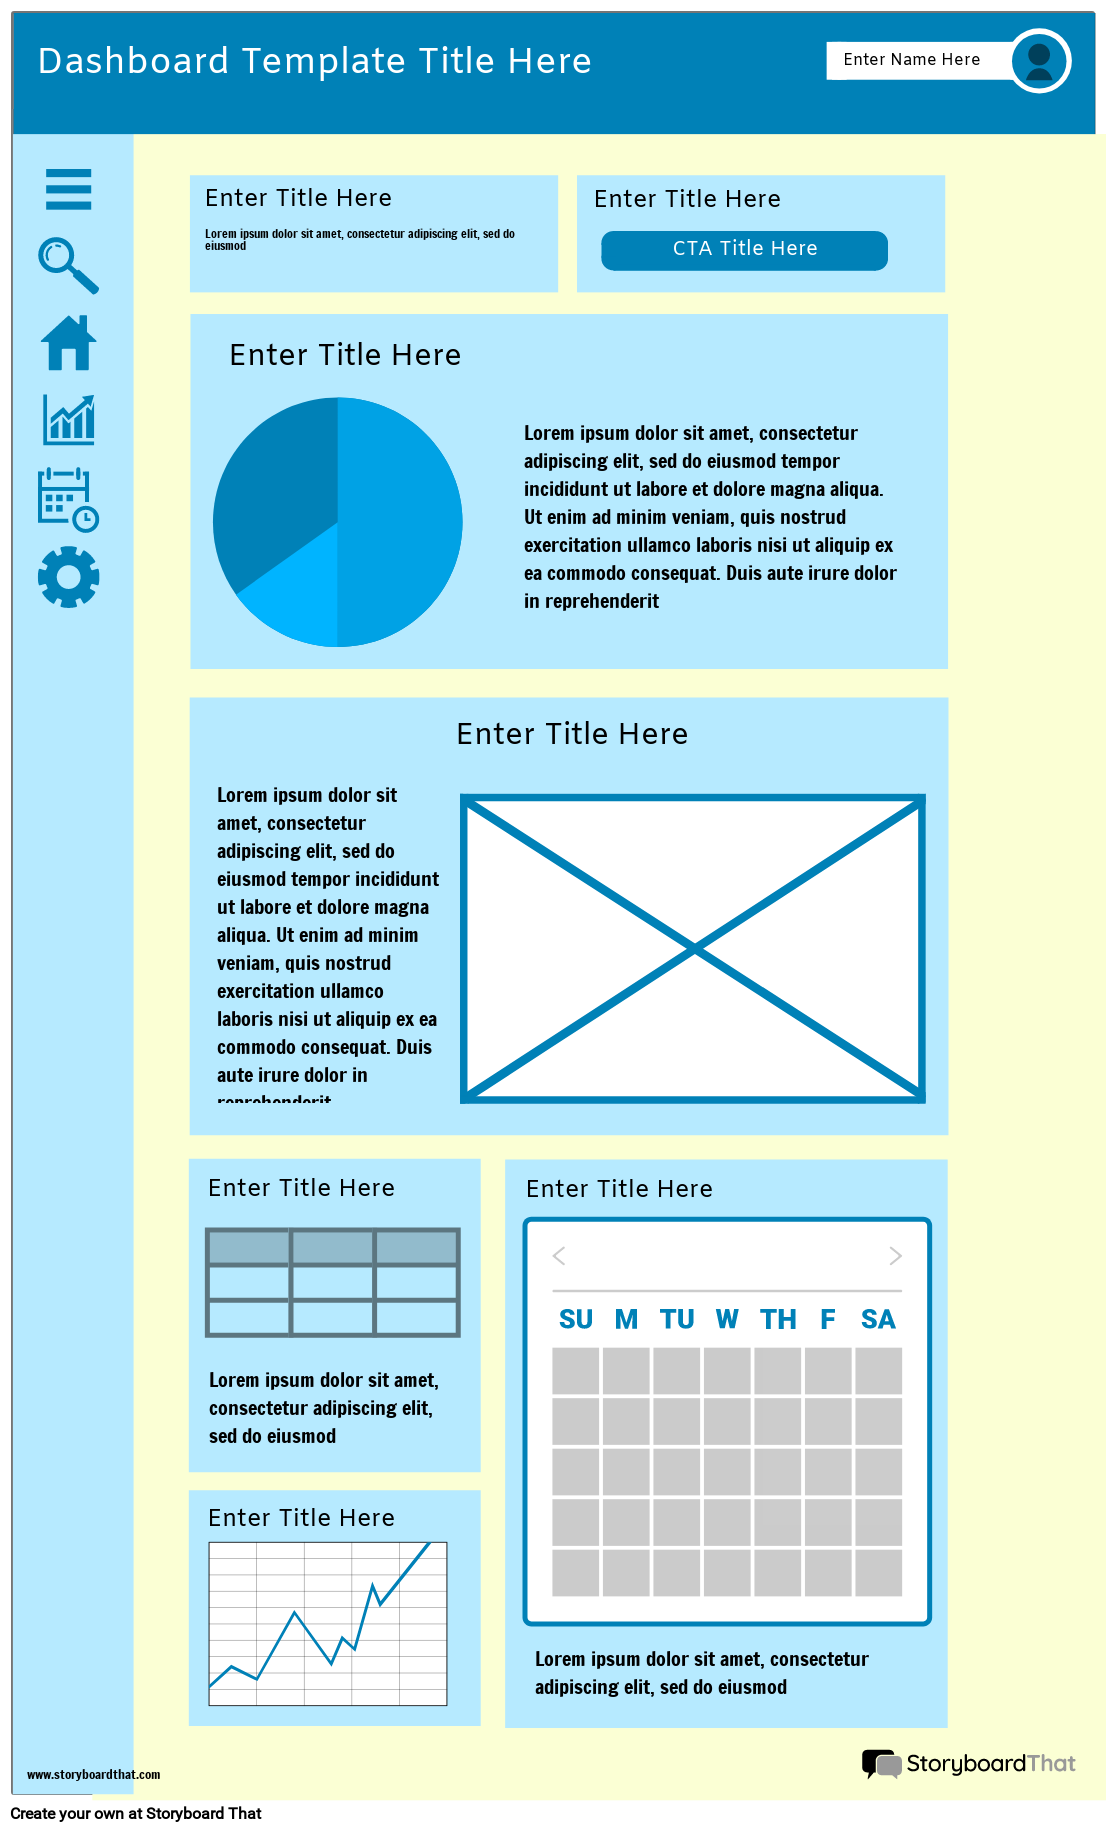 Corporate Dashboard Wireframe Template 1